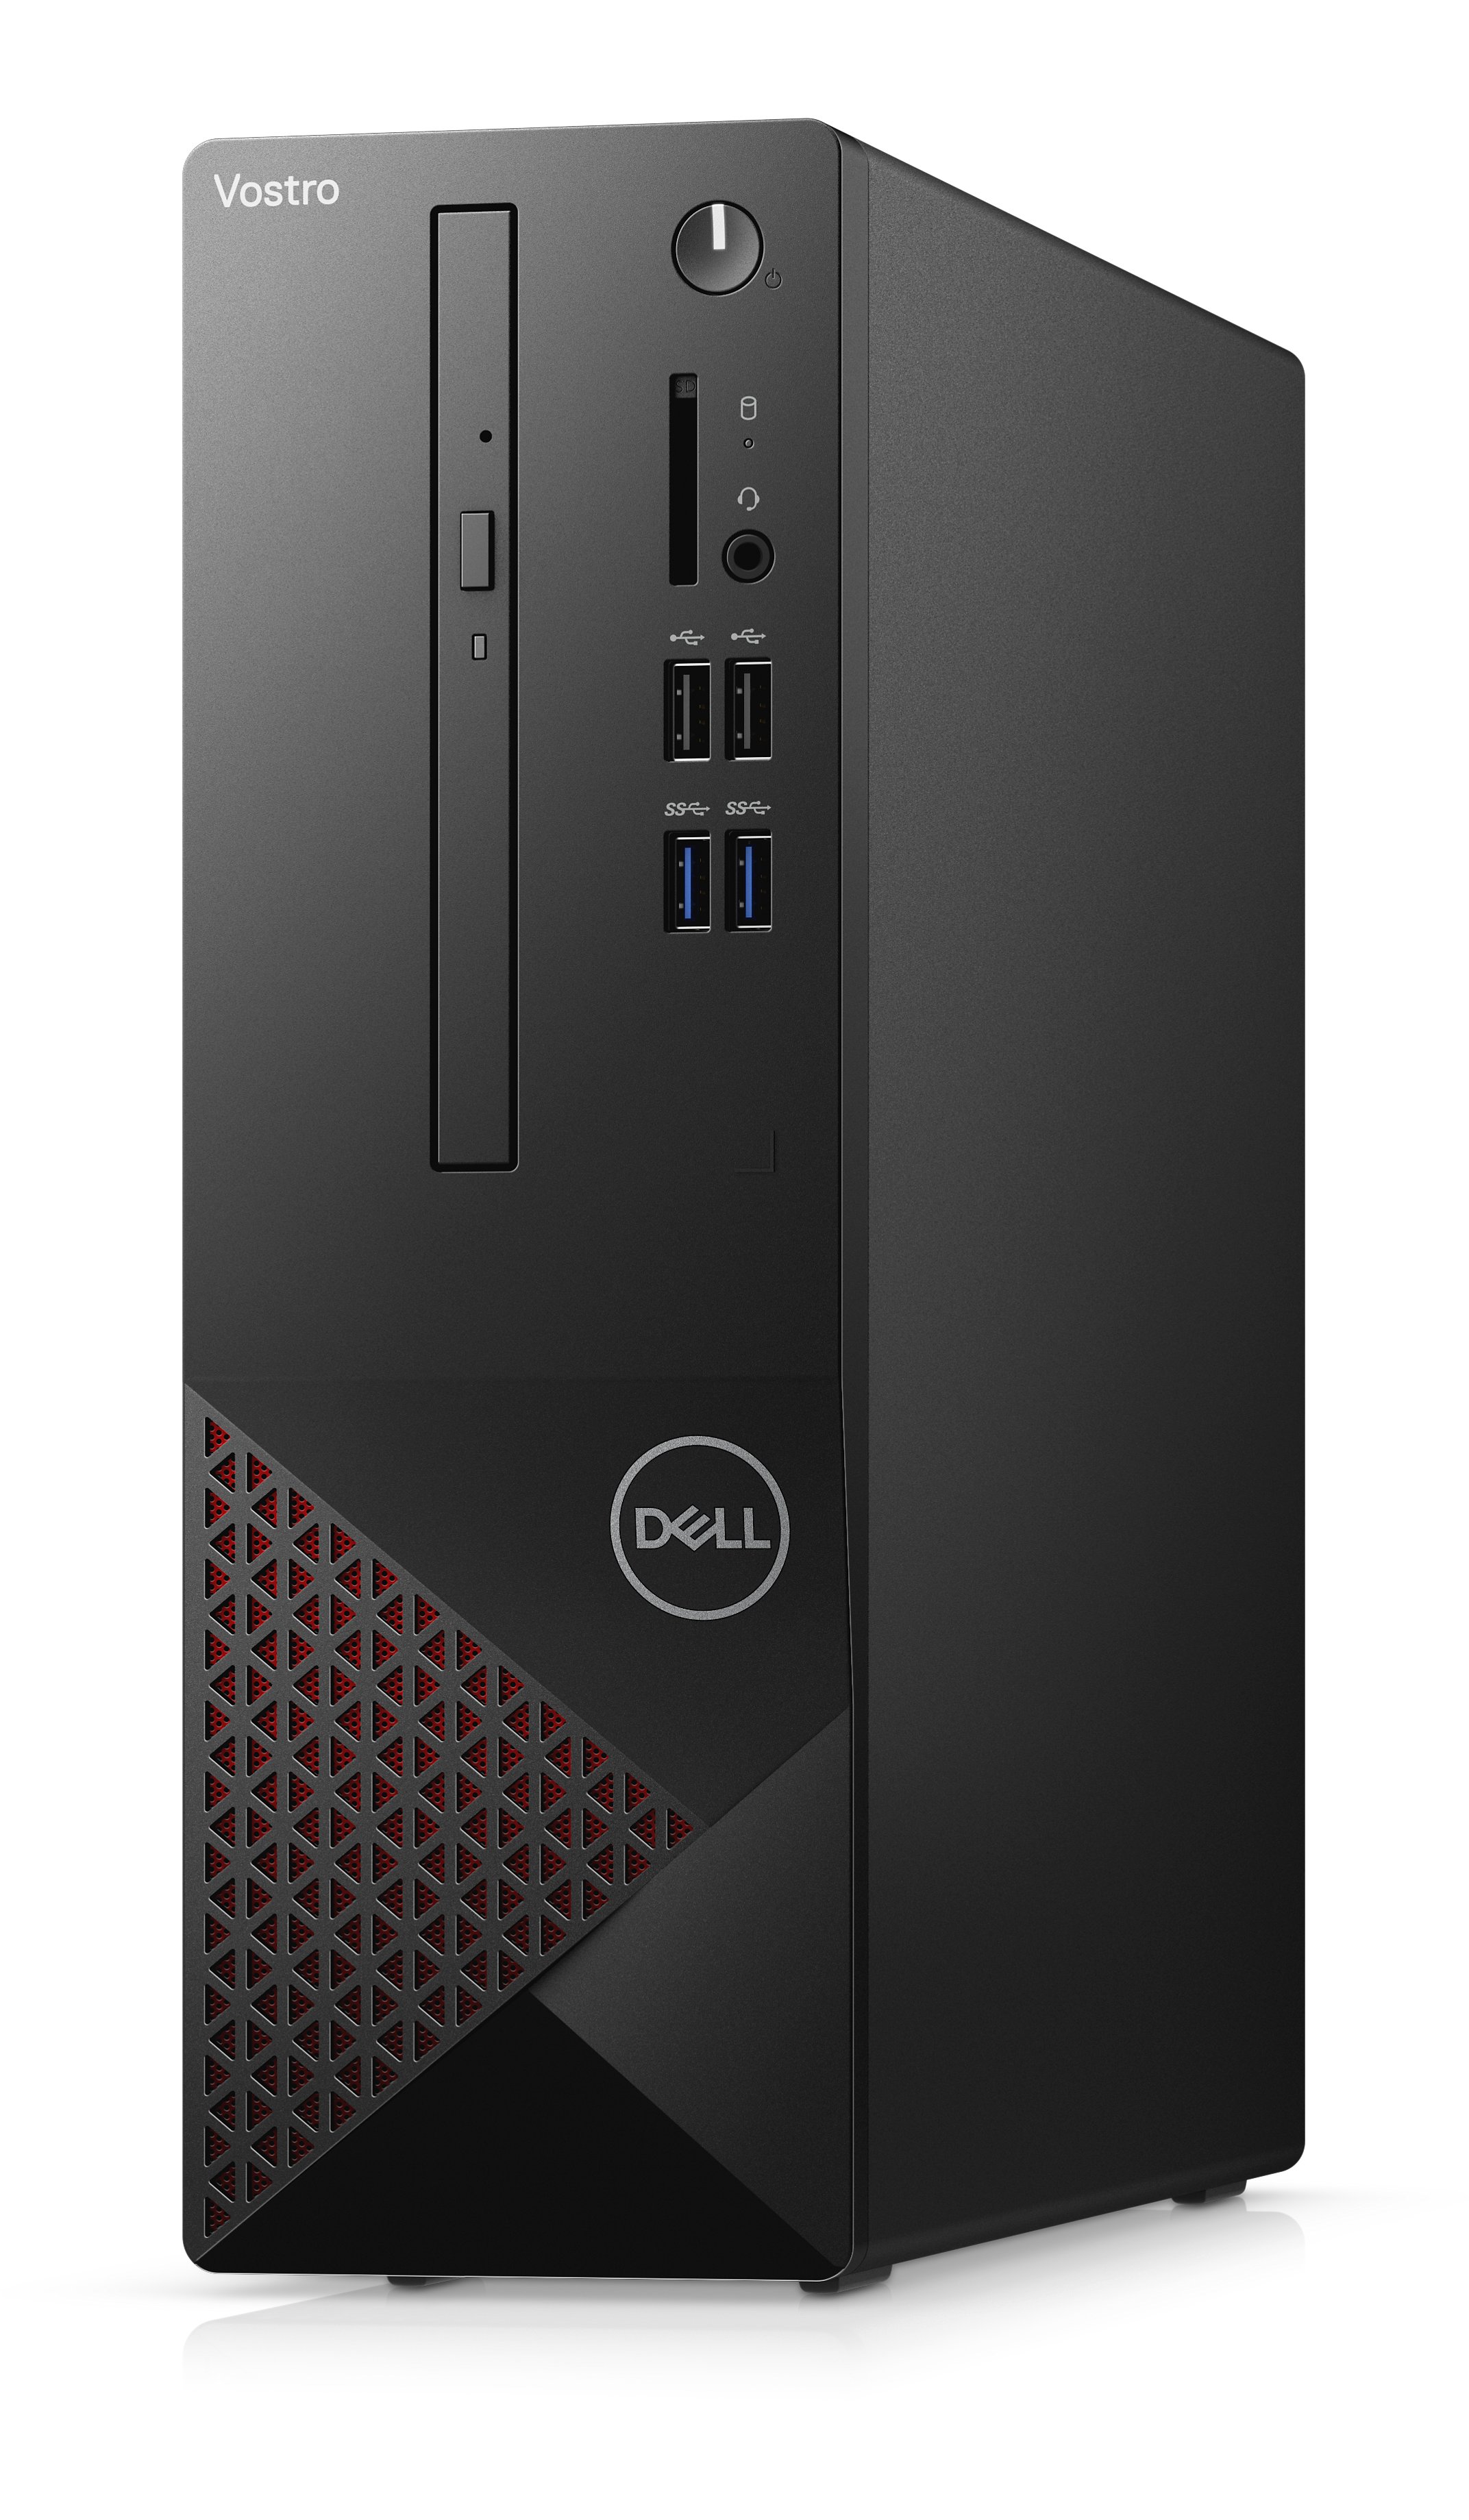 PC Dell Vostro 3681 70226495 Intel Core i5-10400(2.90 GHz,12 MB),4GB RAM,1TB HDD,WL+BT,Mouse,Keyboard,Win 10 Home,McAfeeMDS,1Yr,